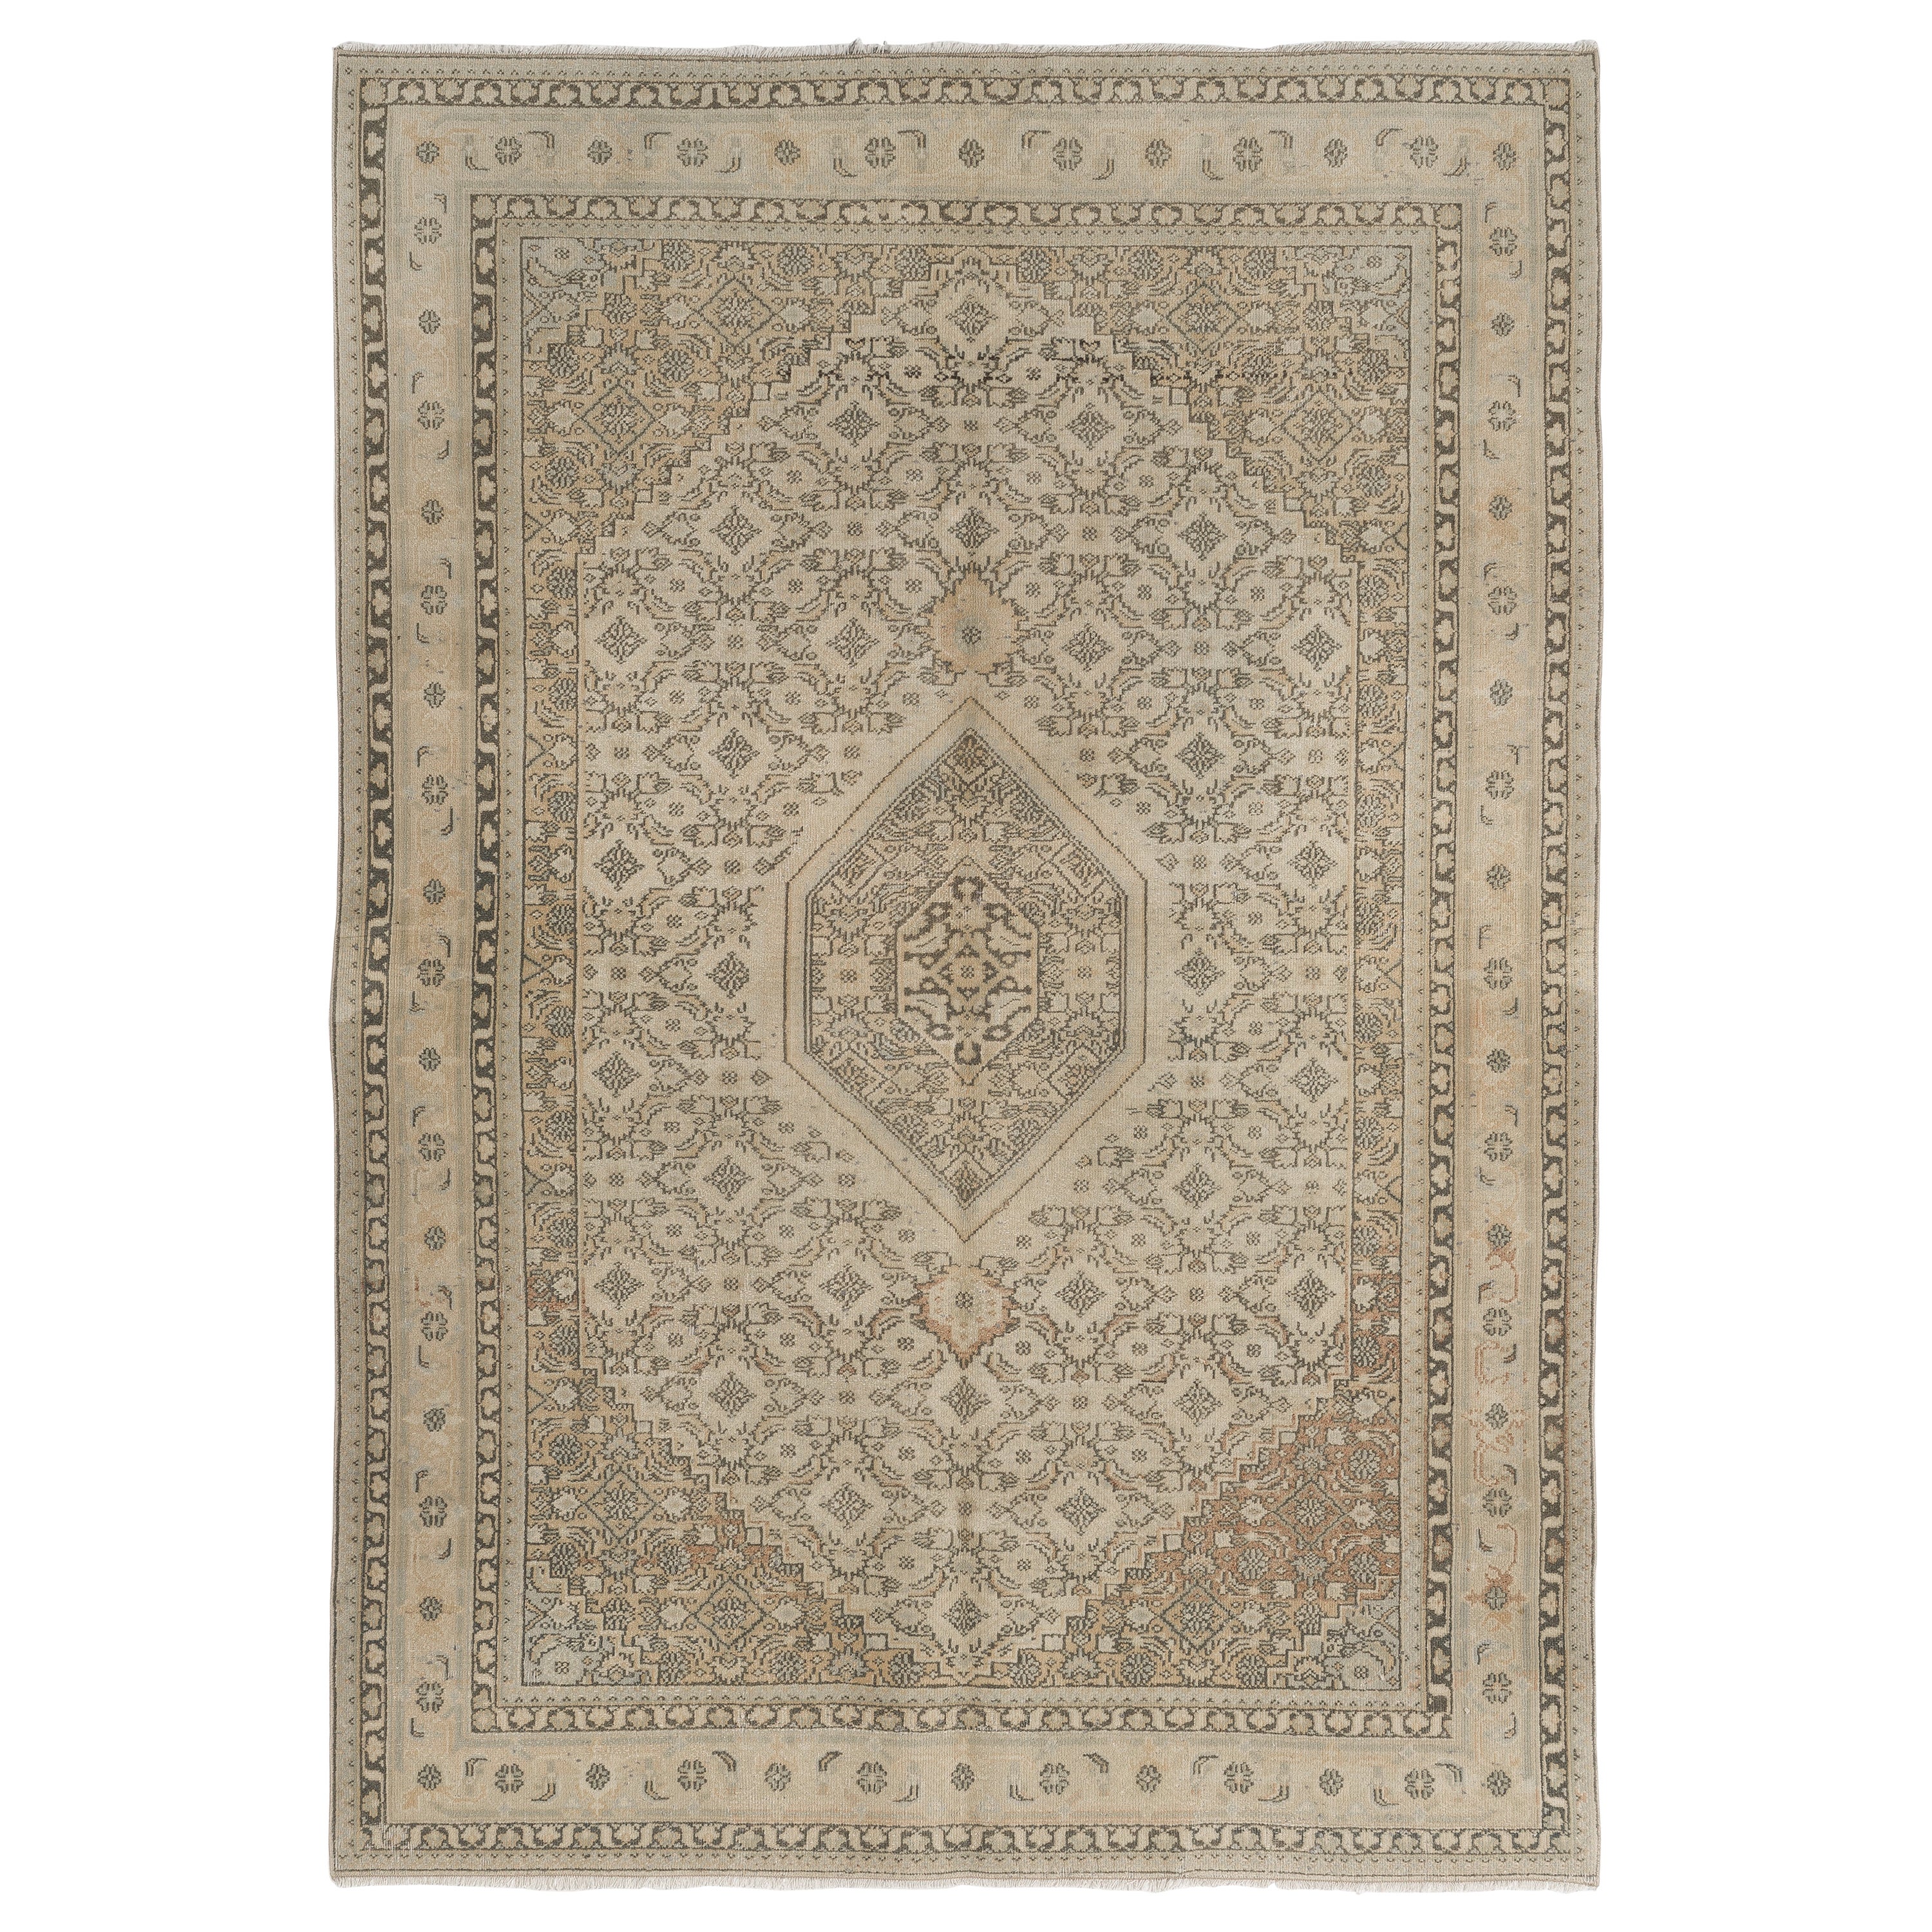 5.4x7.7 ft Hand Made Vintage Anatolian Oushak Wool Area Rug in Neutral Colors en vente